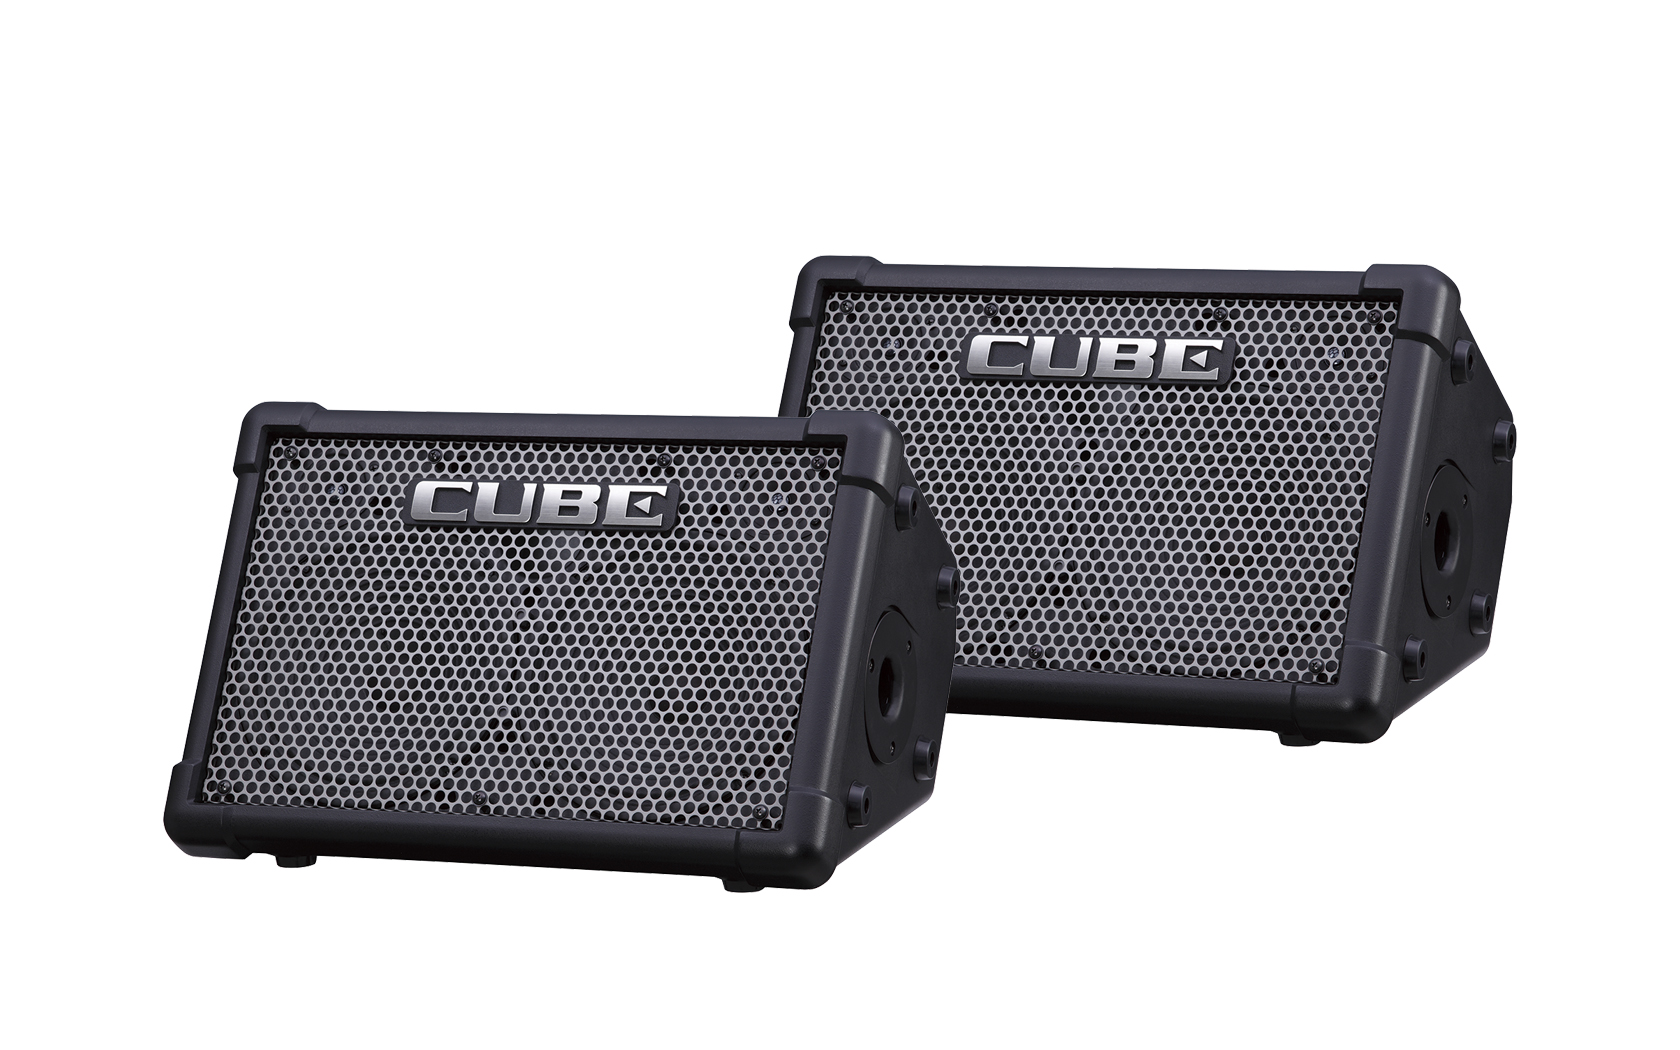 Roland - CUBE Street EX PA Pack | Battery-Powered Stereo Amplifier